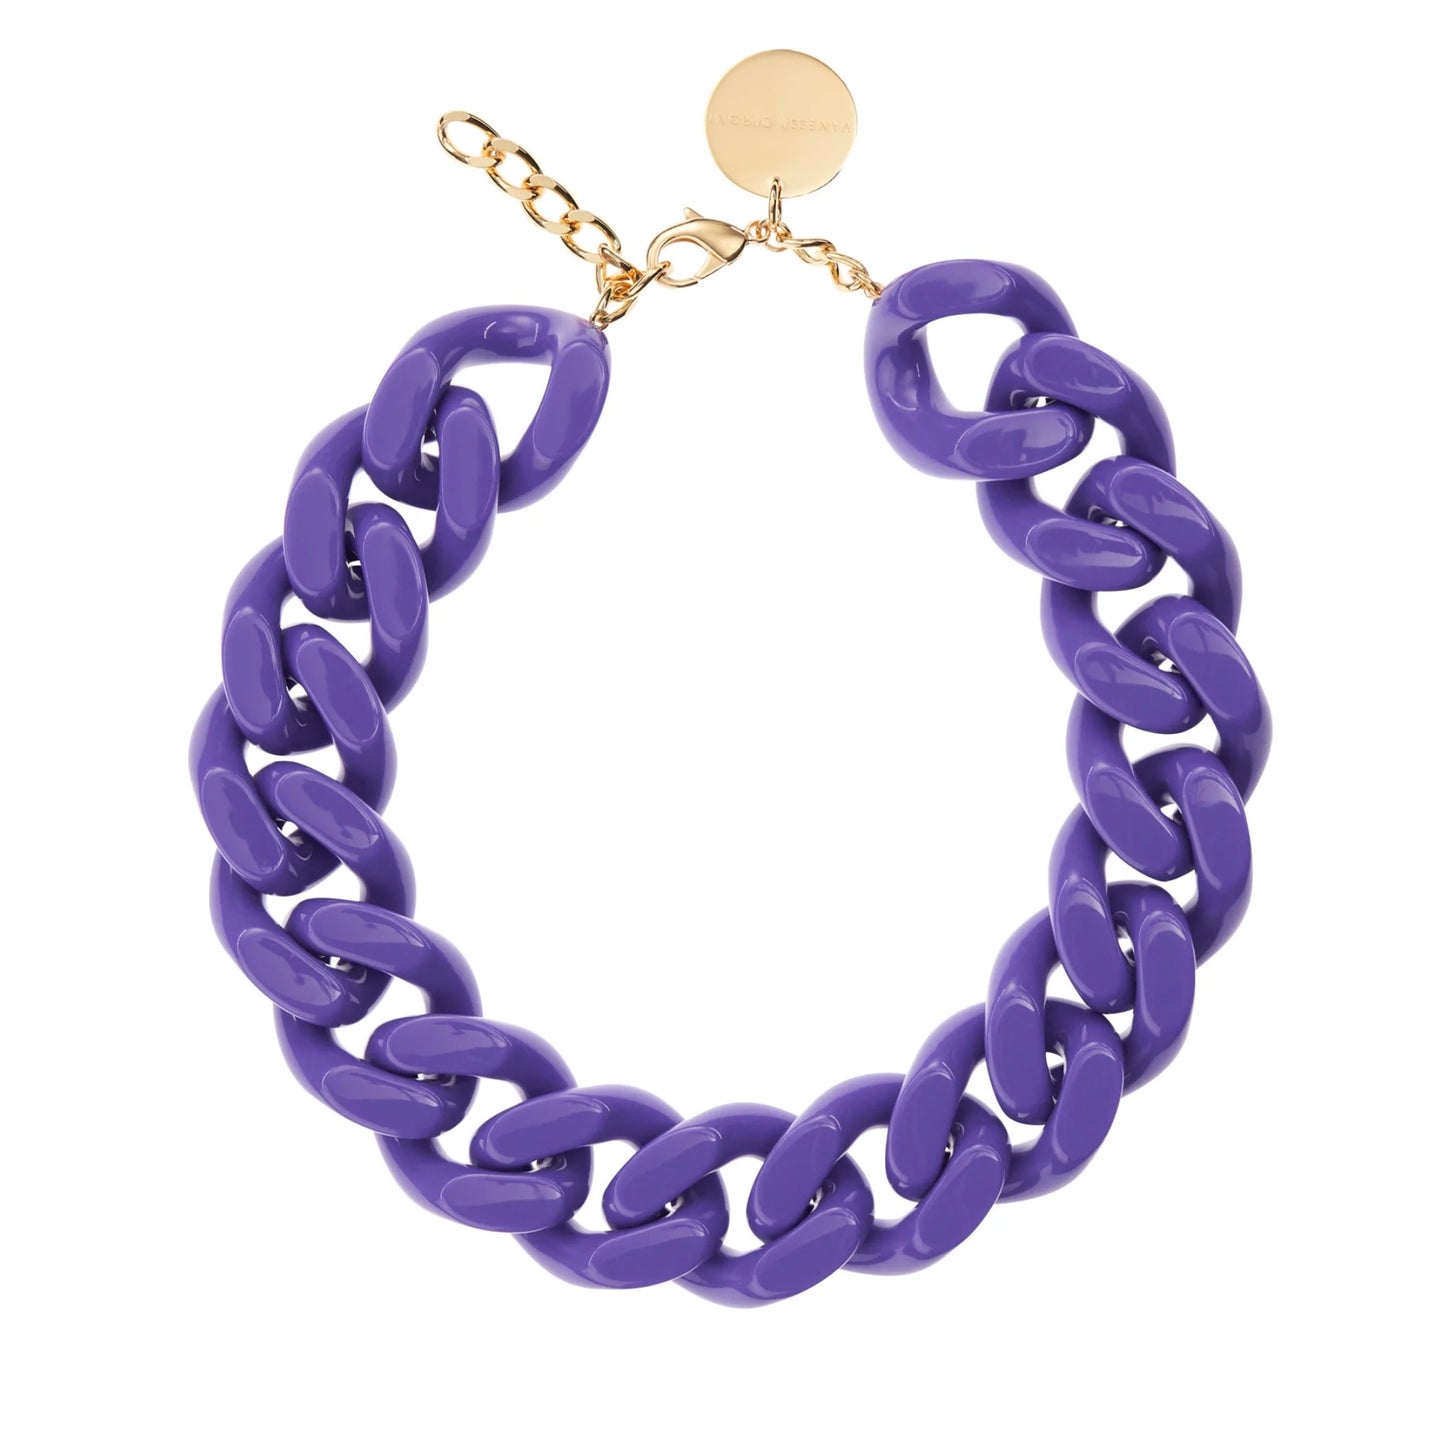 Big Flat Chain Necklace - VIolet by Vanessa Baroni